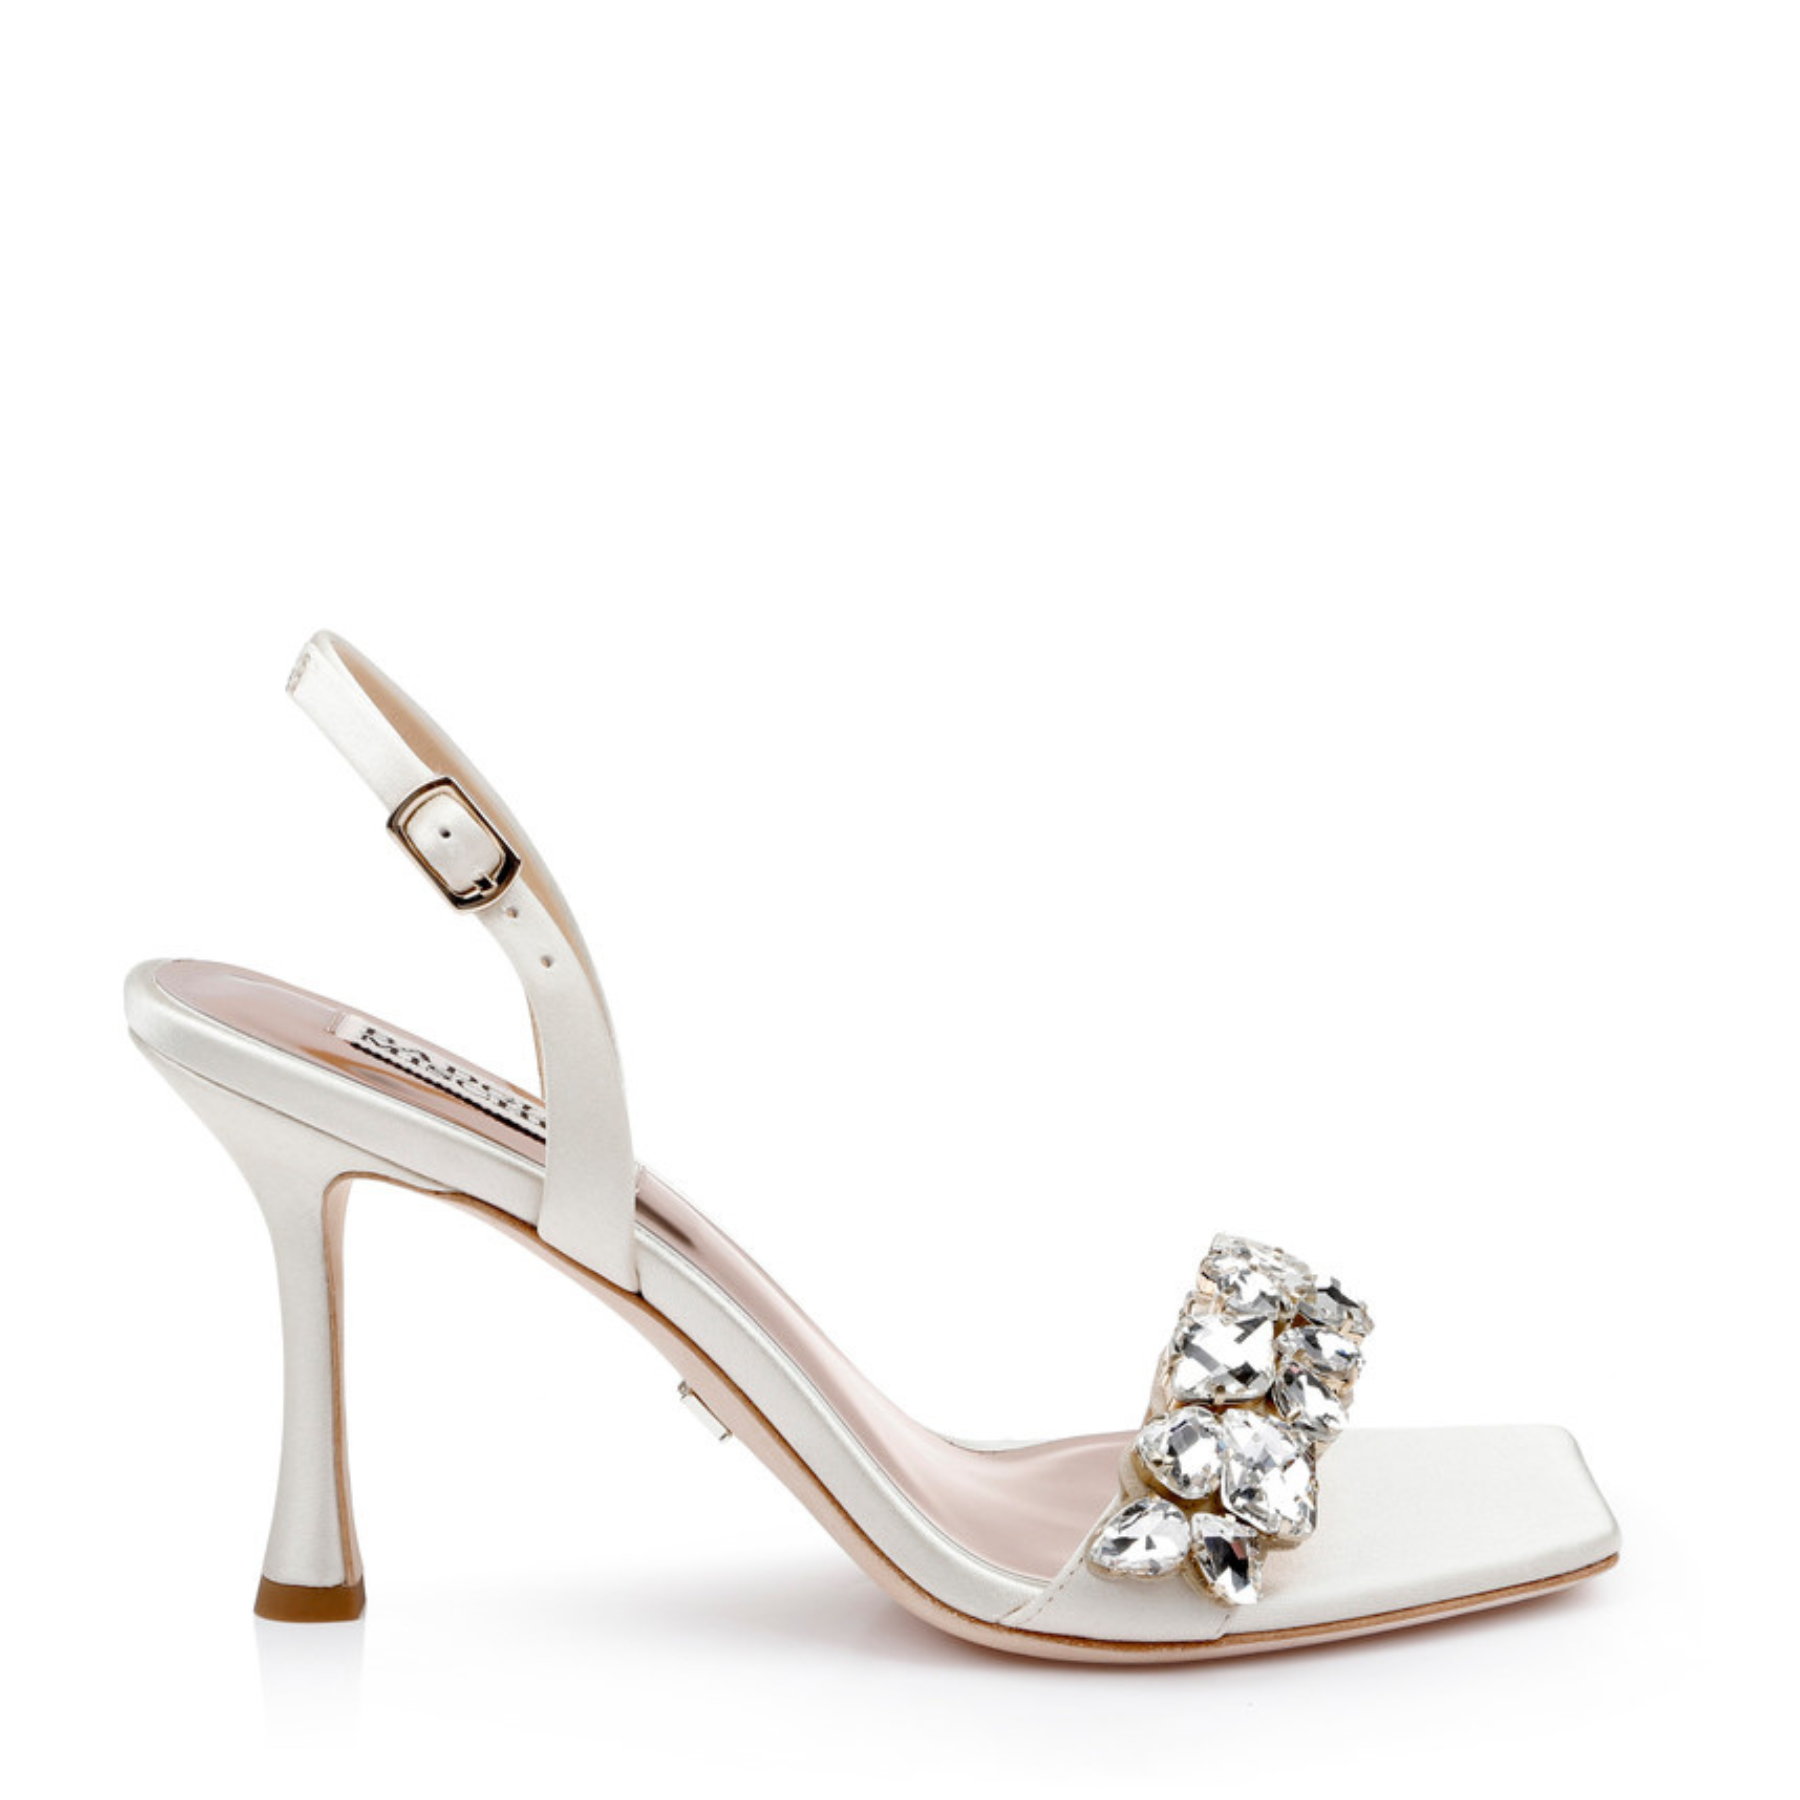 Leanna - Strappy Crystal Square Toe Slingback Heels - Ivory